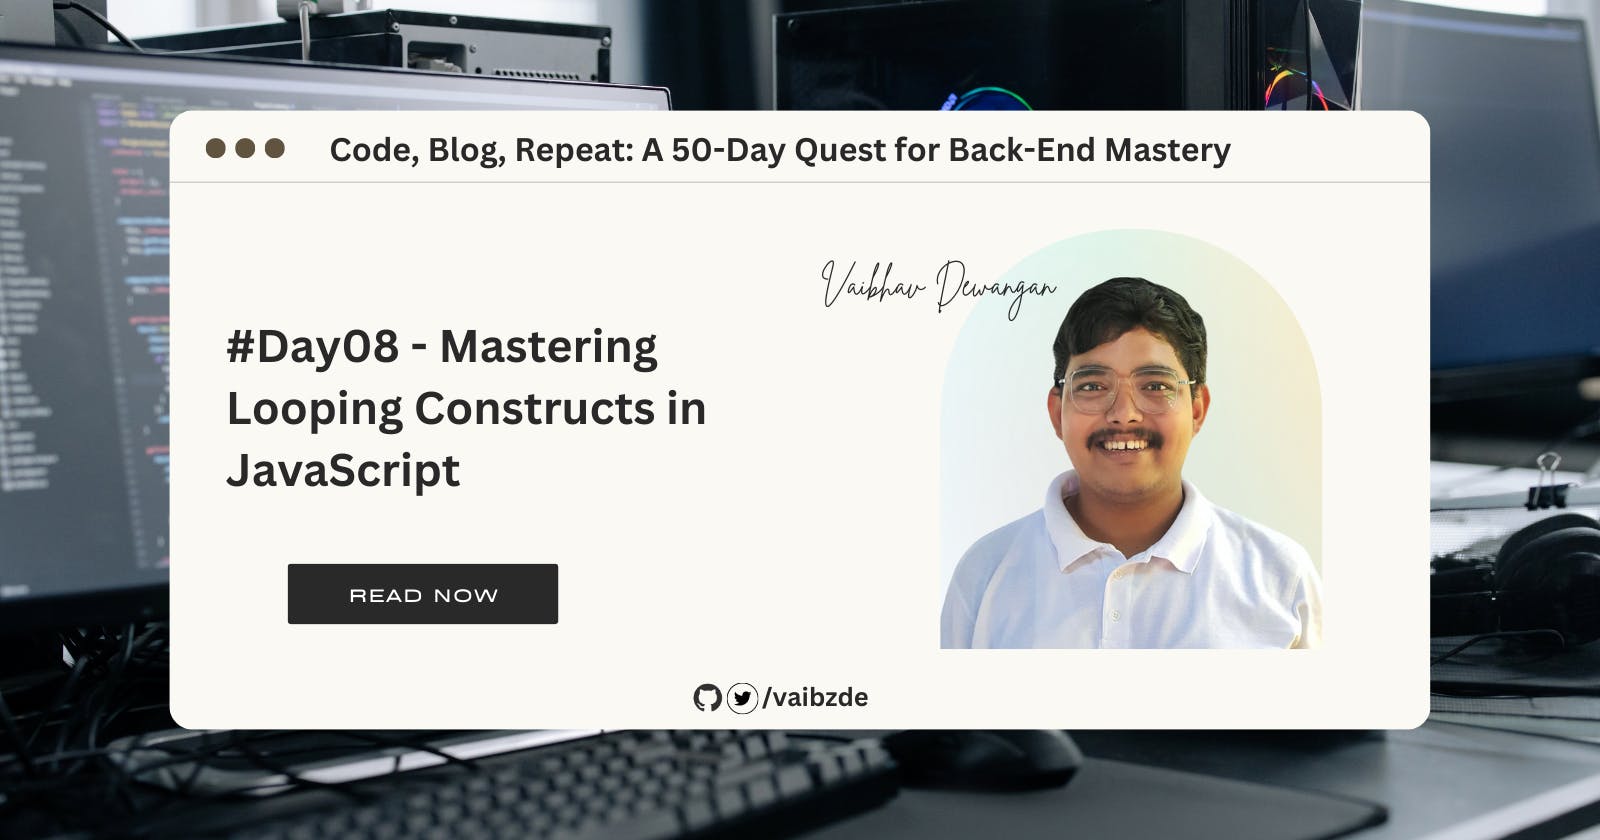 #Day08 - Mastering Looping Constructs in JavaScript